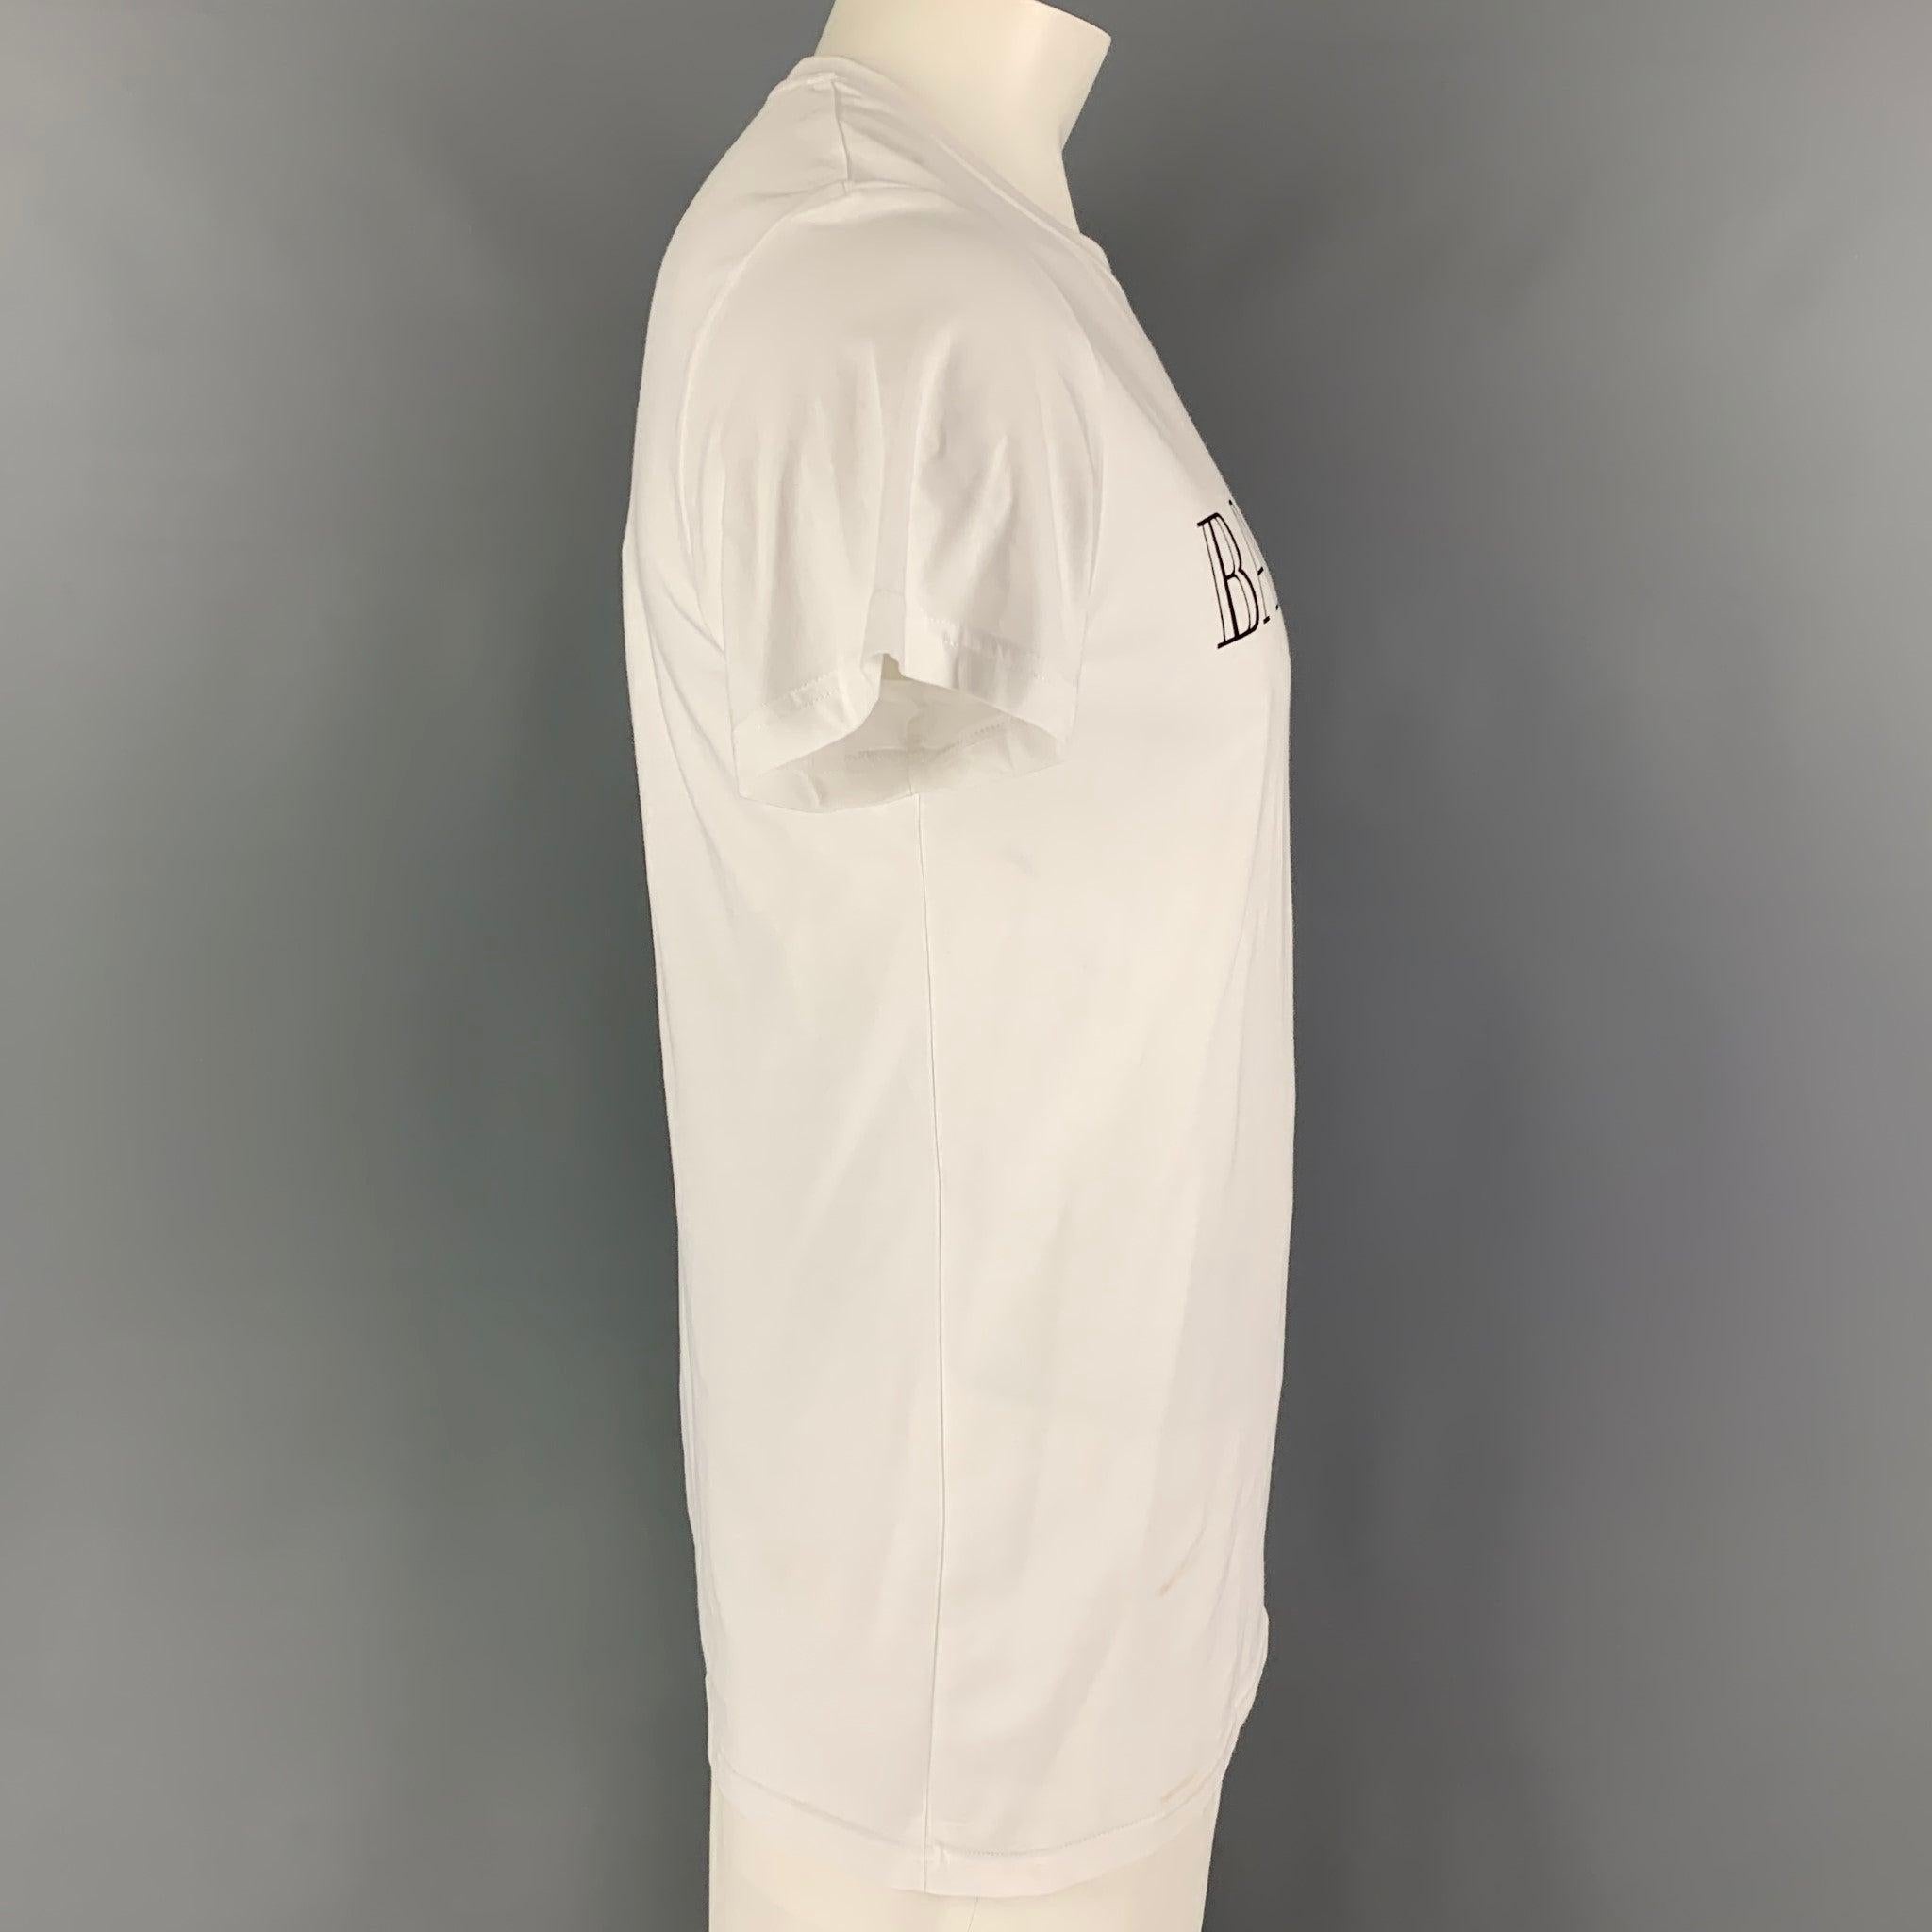 BALMAIN t-shirt comes in a white cotton featuring a front logo design and a crew-neck. Made in Italy.
Excellent
Pre-Owned Condition. 

Marked:   L  

Measurements: 
 
Shoulder: 18 inches Chest: 42 inches Sleeve: 7.5 inches Length: 29 inches 
  
  
